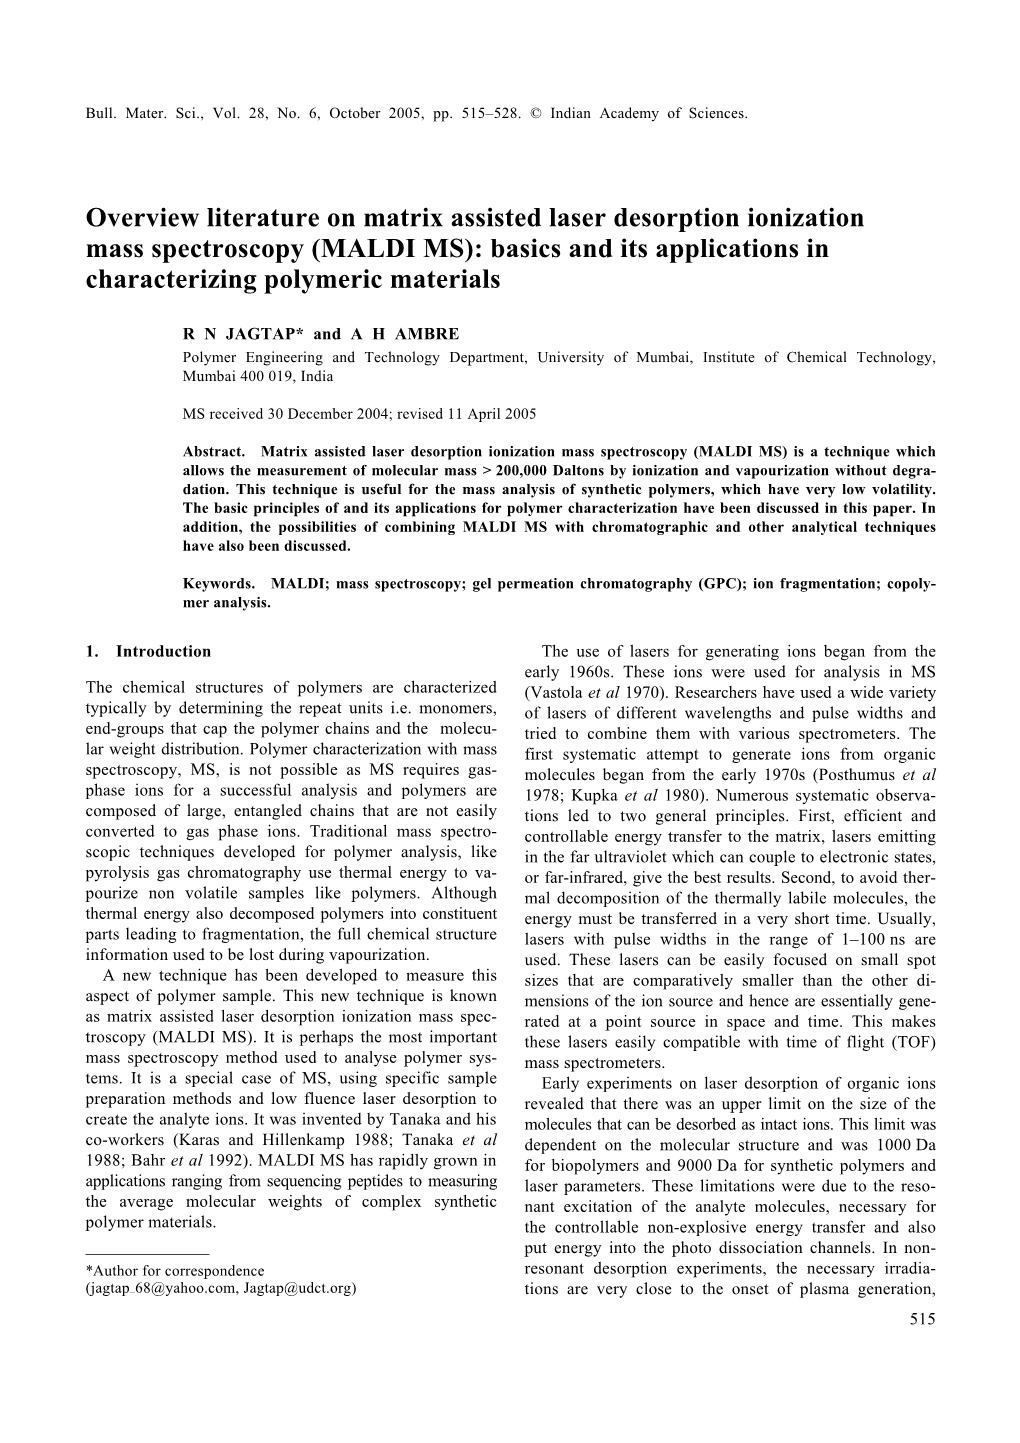 Overview Literature on Matrix Assisted Laser Desorption Ionization Mass Spectroscopy (MALDI MS): Basics and Its Applications in Characterizing Polymeric Materials